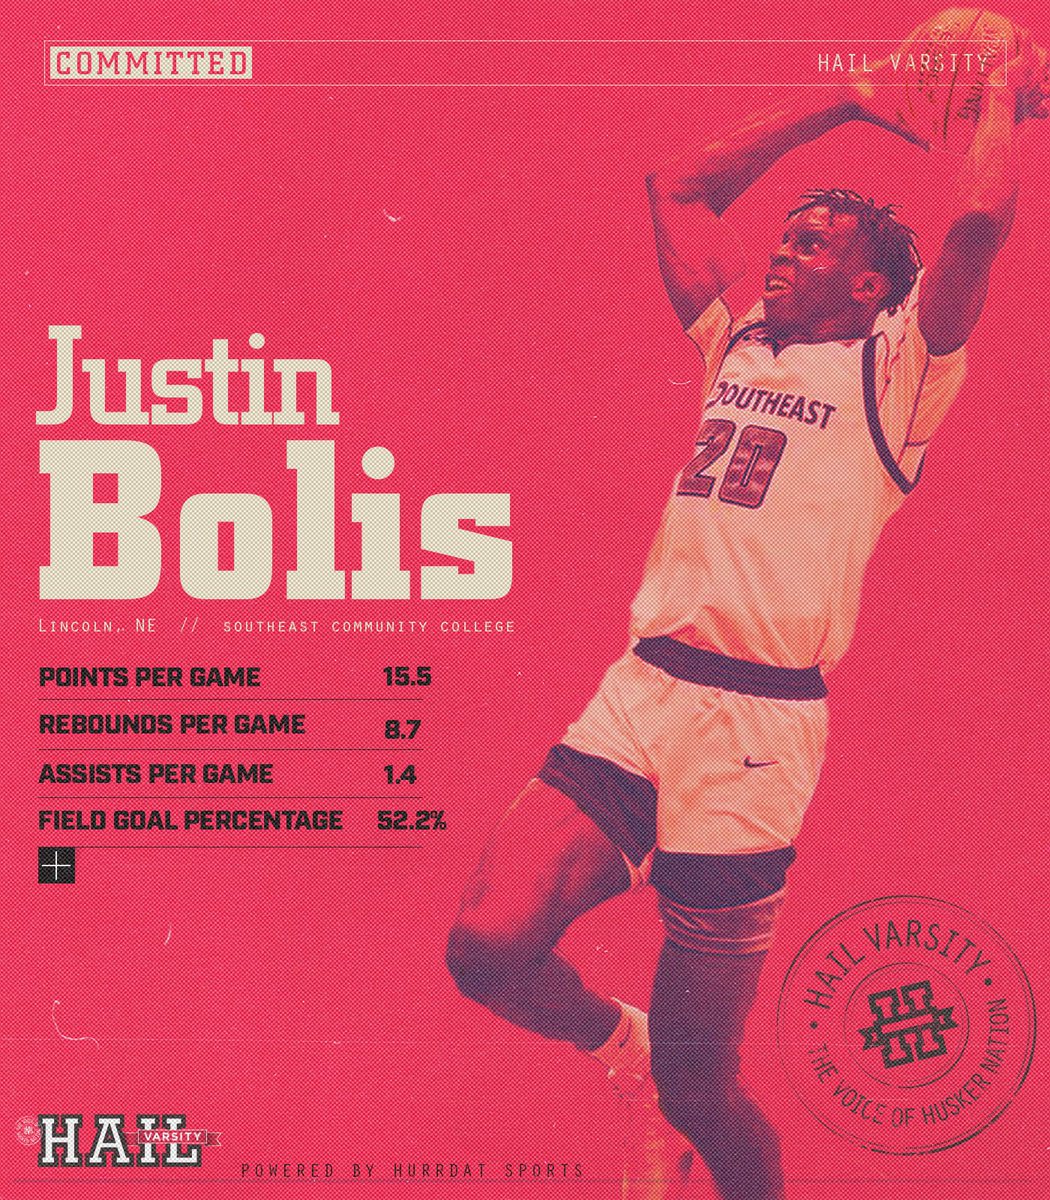 BREAKING: Justin Bolis commits to Nebraska. The 6’9” Lincoln, NE native will transfer in with three years of eligibility remaining. Bolis averaged 15.5 PPG, 8.7 RPG, while shooting 52.2% in 31 starts for Southeast CC. #GBR | #Huskers